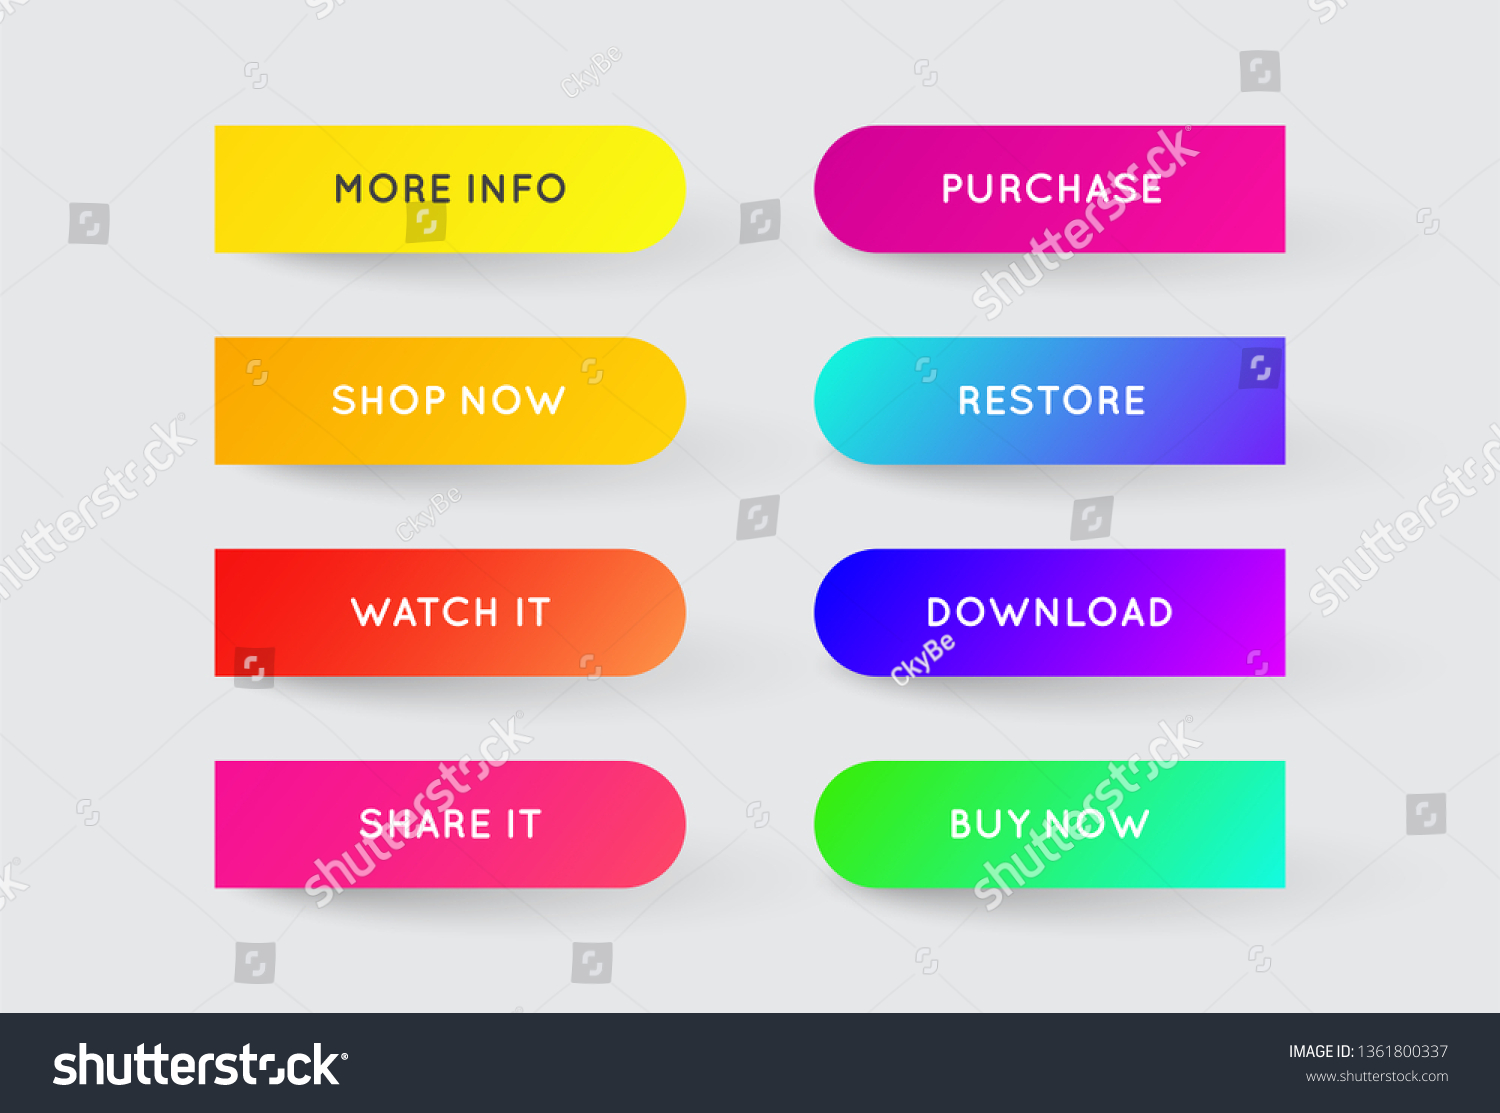 Set of Vector Modern Gradient App or Game Buttons. Trendy gradient colors with shadows.  #1361800337